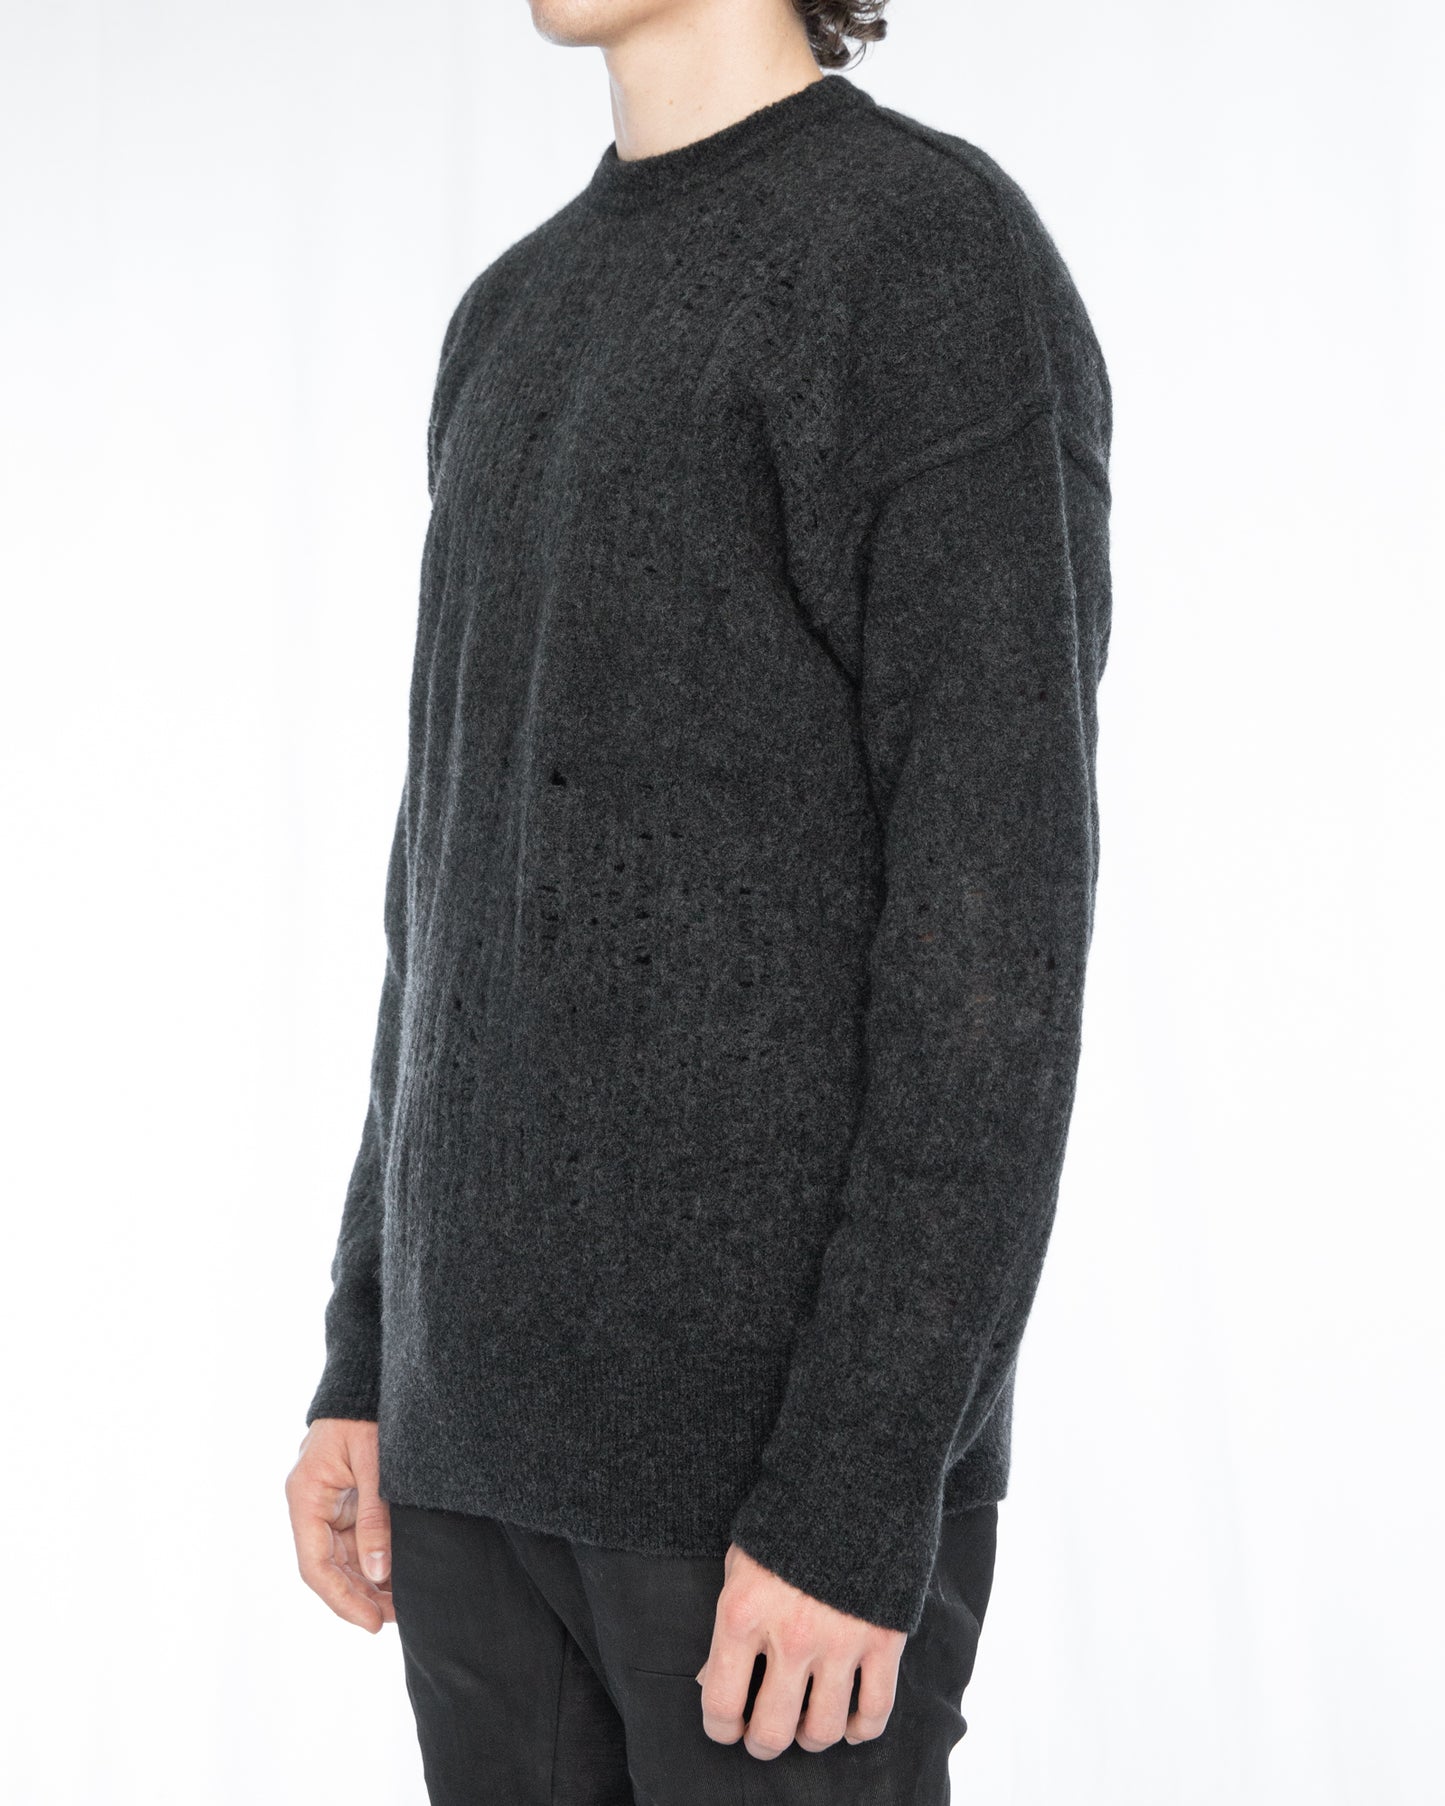 Graphite Destroyed Round Neck Cut Out Details Wool Yak Sweater